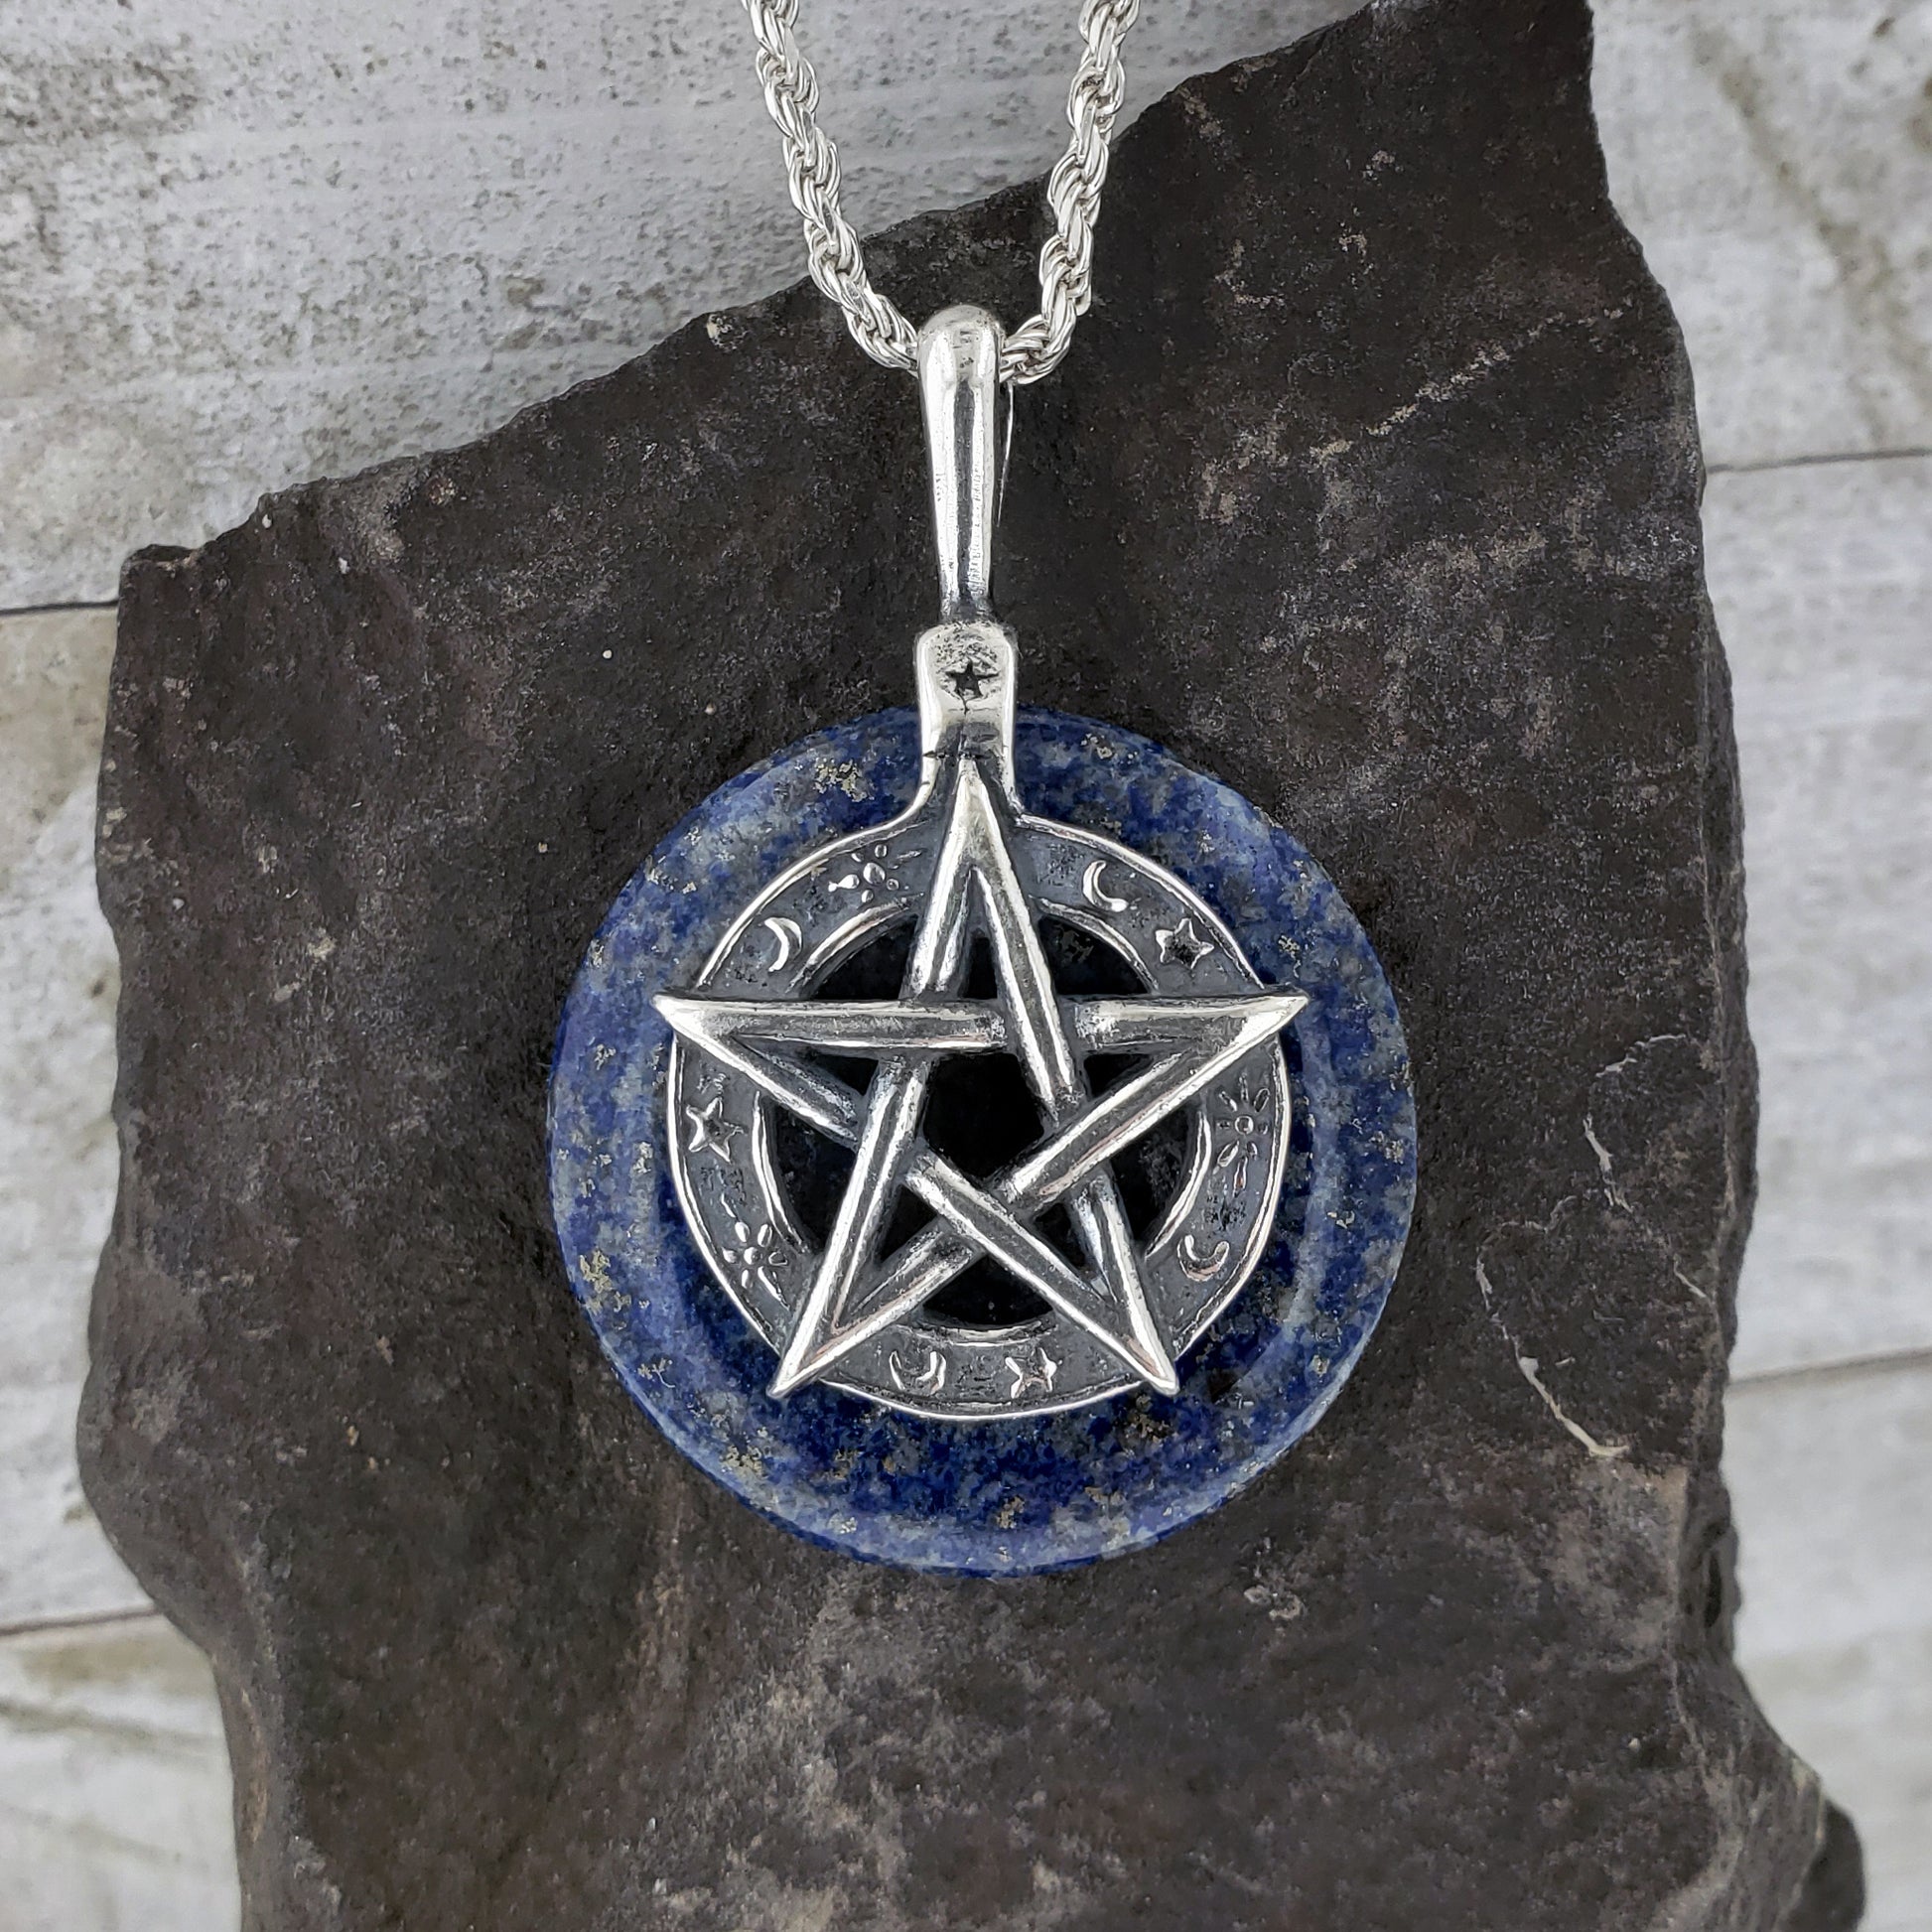 Shiv Creation Bikers Jewelry Fashion Star Circle Pentagram Silver Stainless  Steel Pendant Necklace Chain For Men And Women